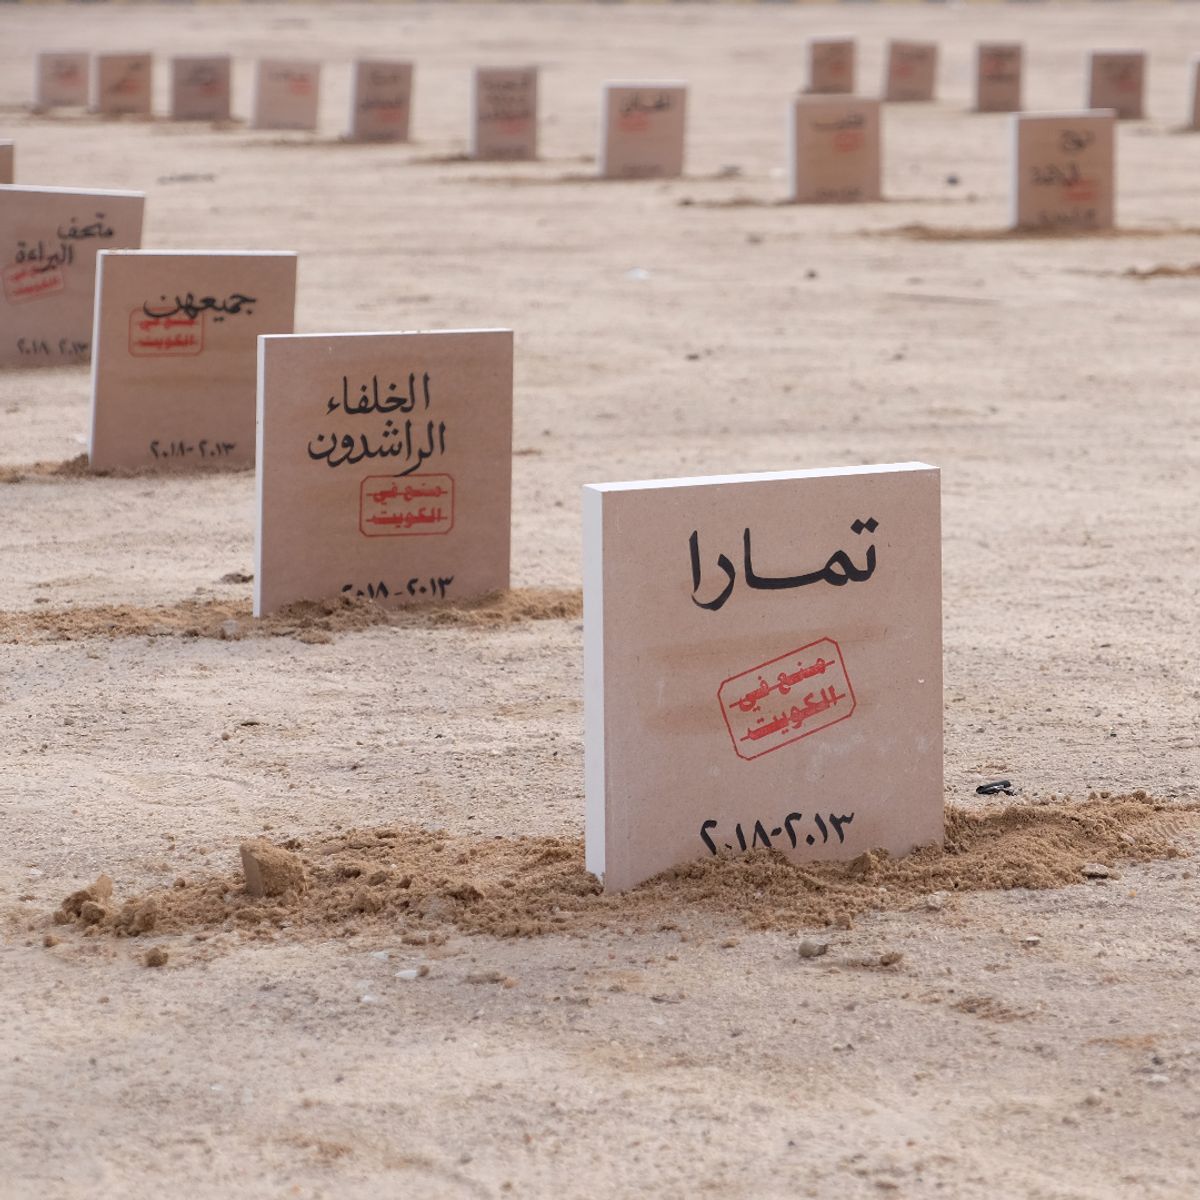 The Cemetery of Banned Books (2018) in Kuwait Courtesy of Mohammad Sharaf